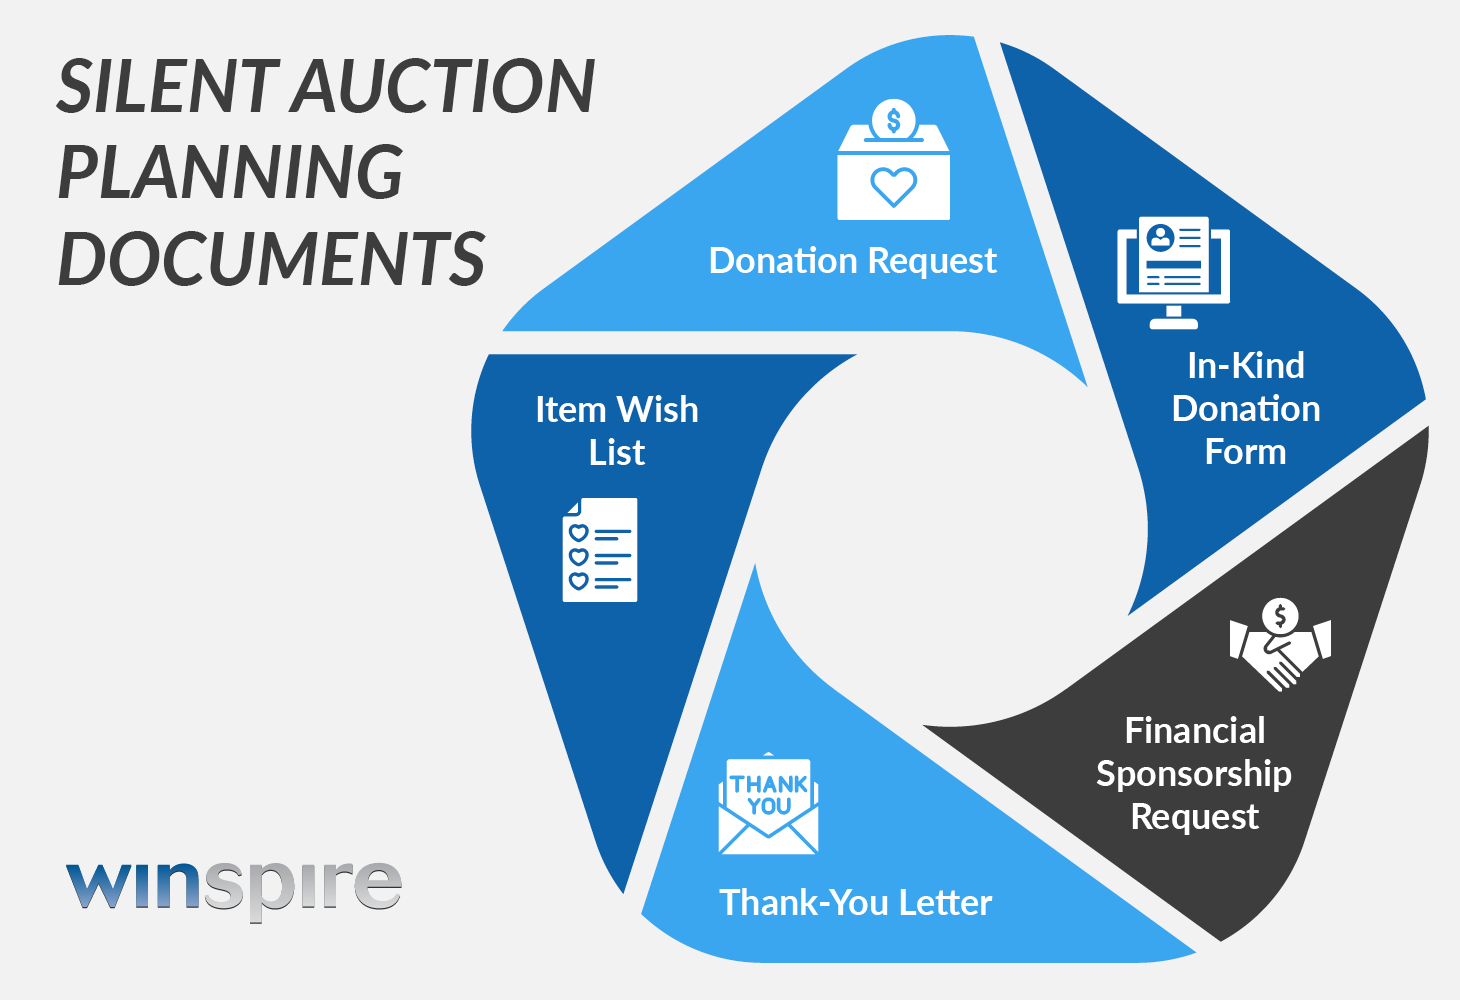 This graphic shows five essential forms for auction planning, including the silent auction donation request and four others listed below.